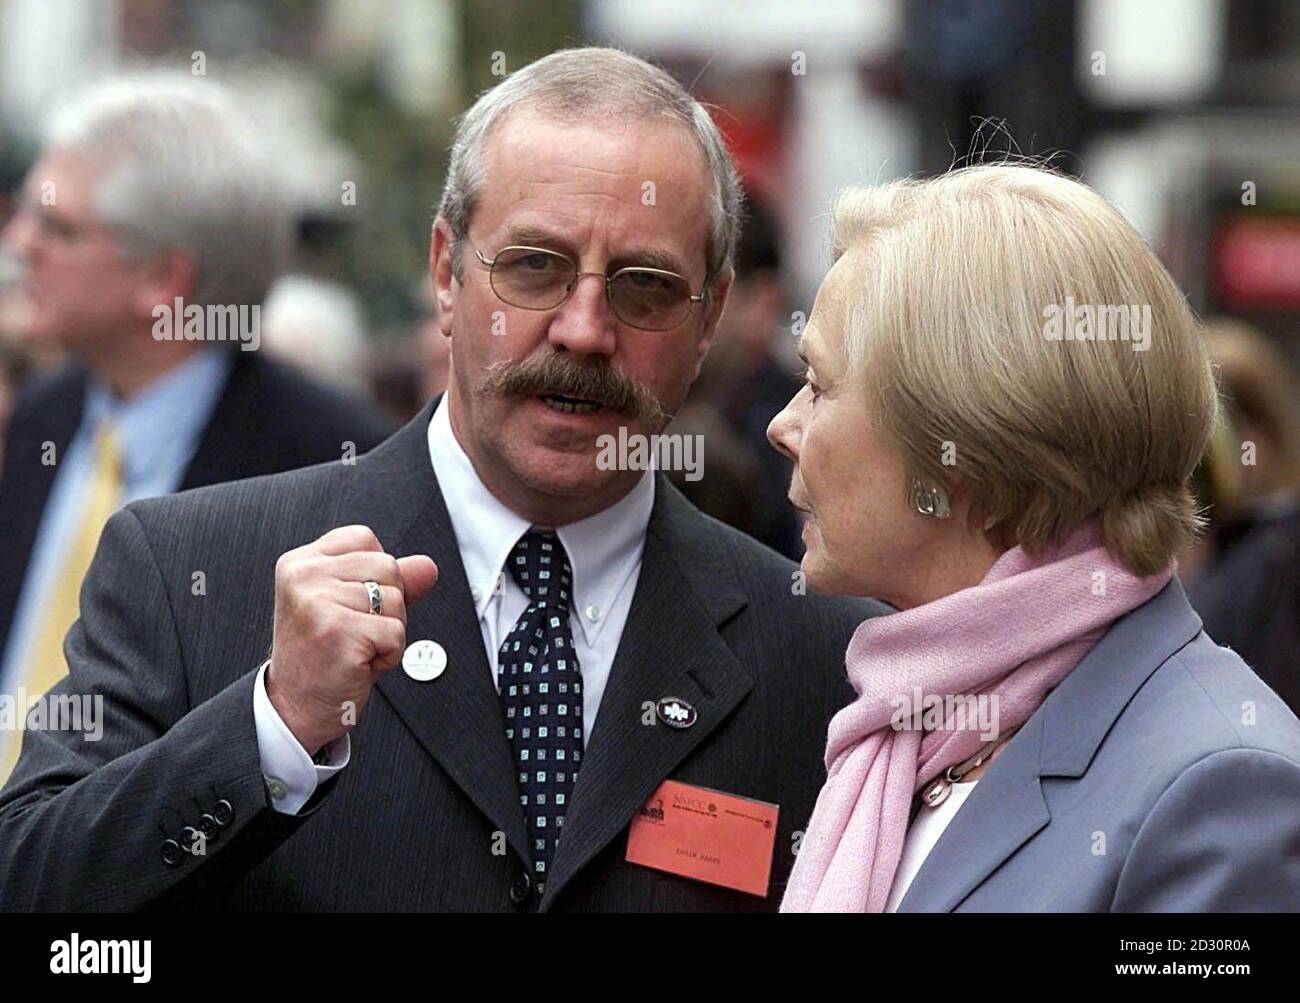 Colin Parry, father of Tim Parry who was killed by the IRA bomb in Warrington seven years ago, with the Duchess of Kent on Bridge Street, the scene of the blast. The Duchess is due officially to open a  3 million peace centre.  * ...dedicated to Tim and Jonathan Ball, the young boys who lost their lives in the bomb blast. Stock Photo